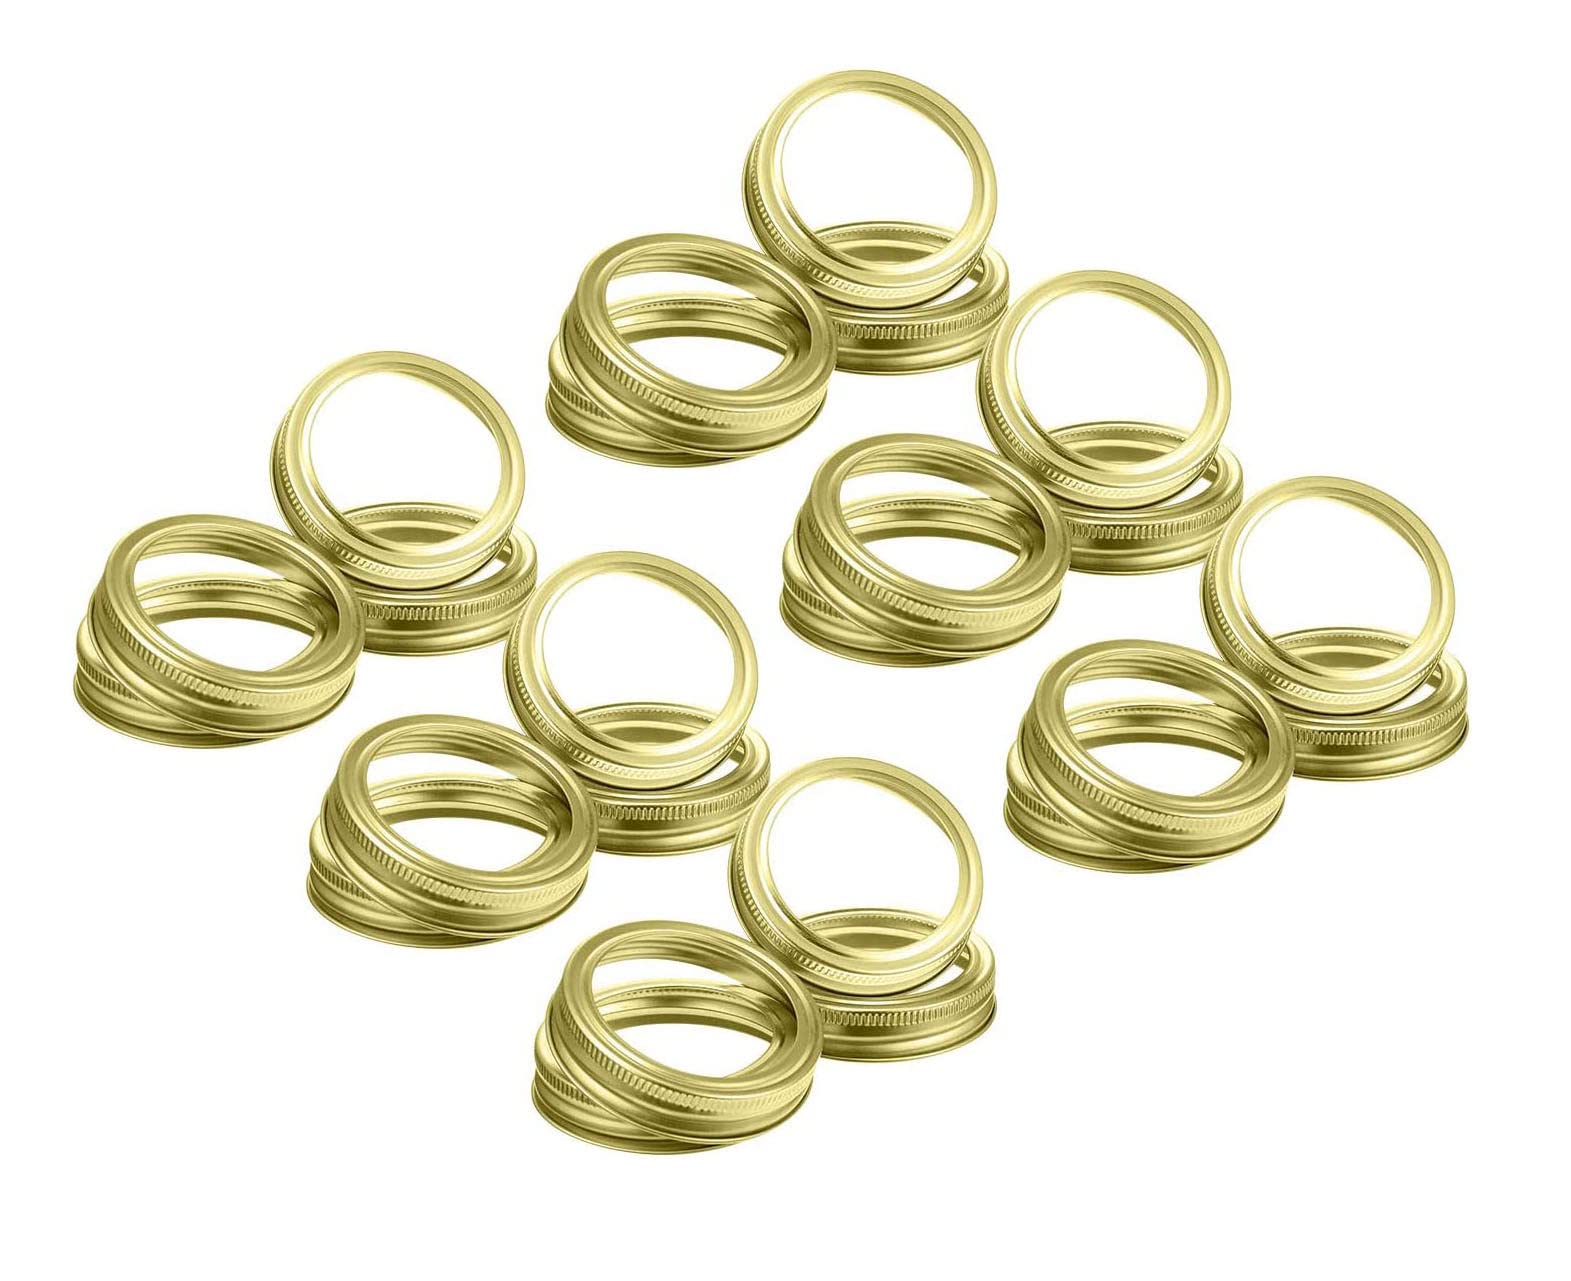 GOLDEN HARVEST 24 Pieces WIDE MOUTH Canning Jar Replacement Metal Rings Practical Screw Jar Bands Leak Proof Tinplate Metal Bands Rings, Compatible with Mason Jar (Gold)